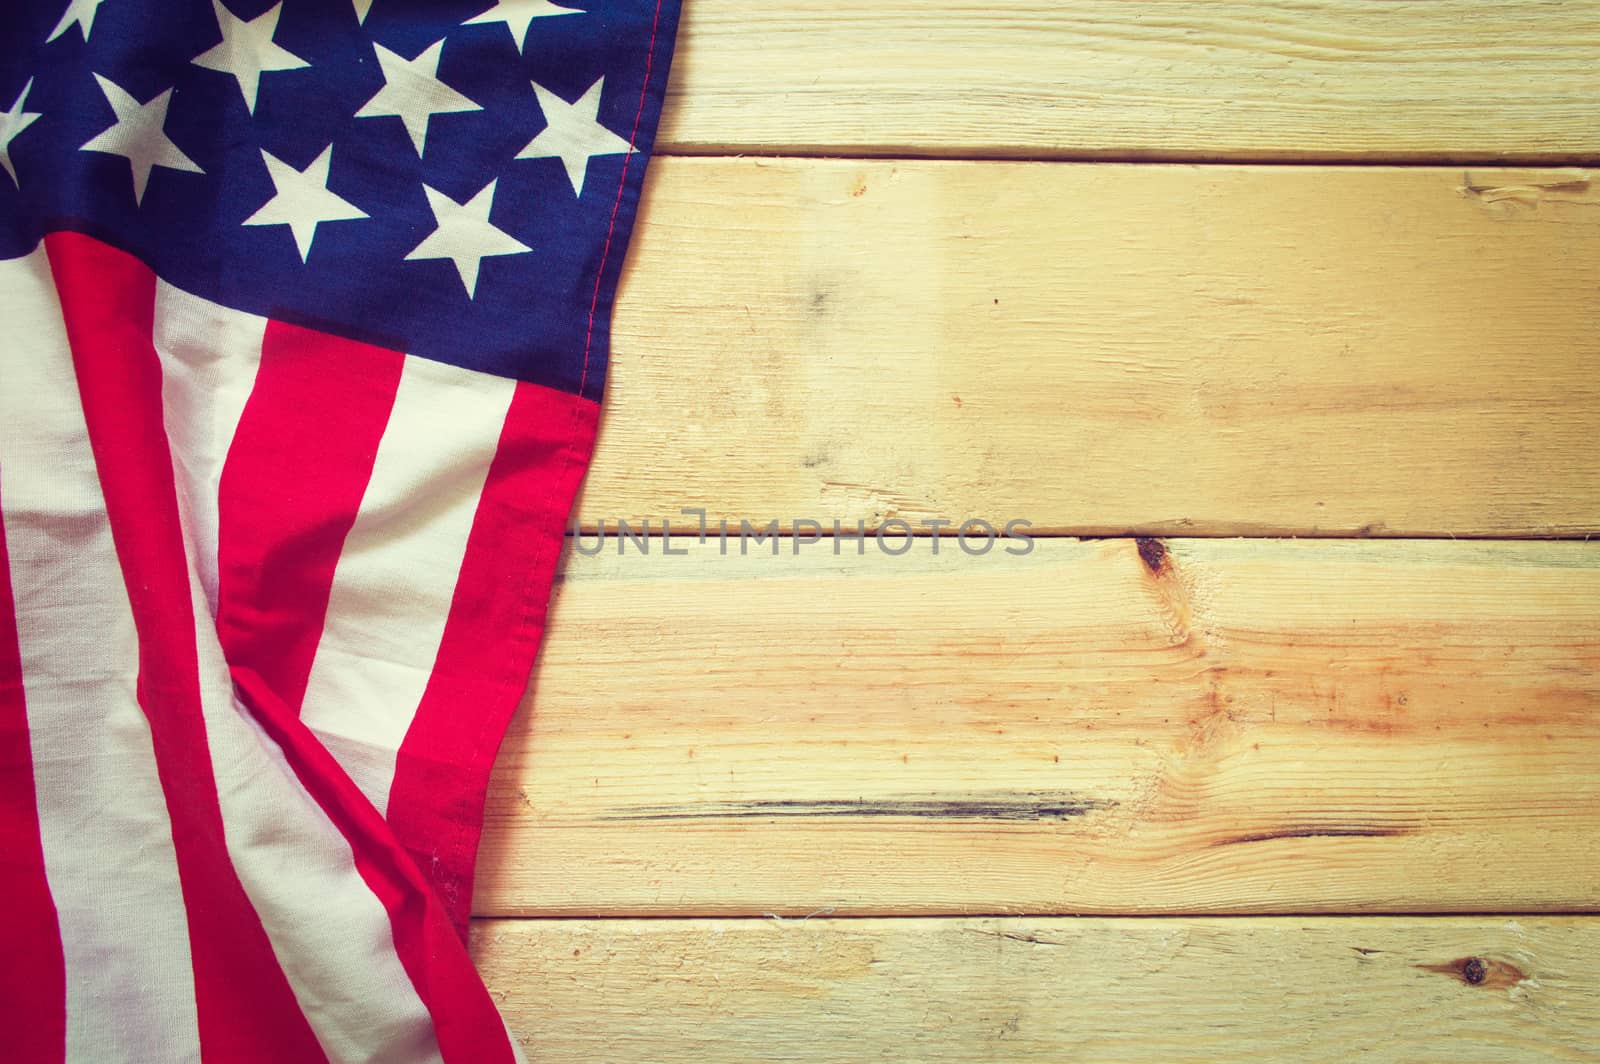  American flag on wooden background retro effect image